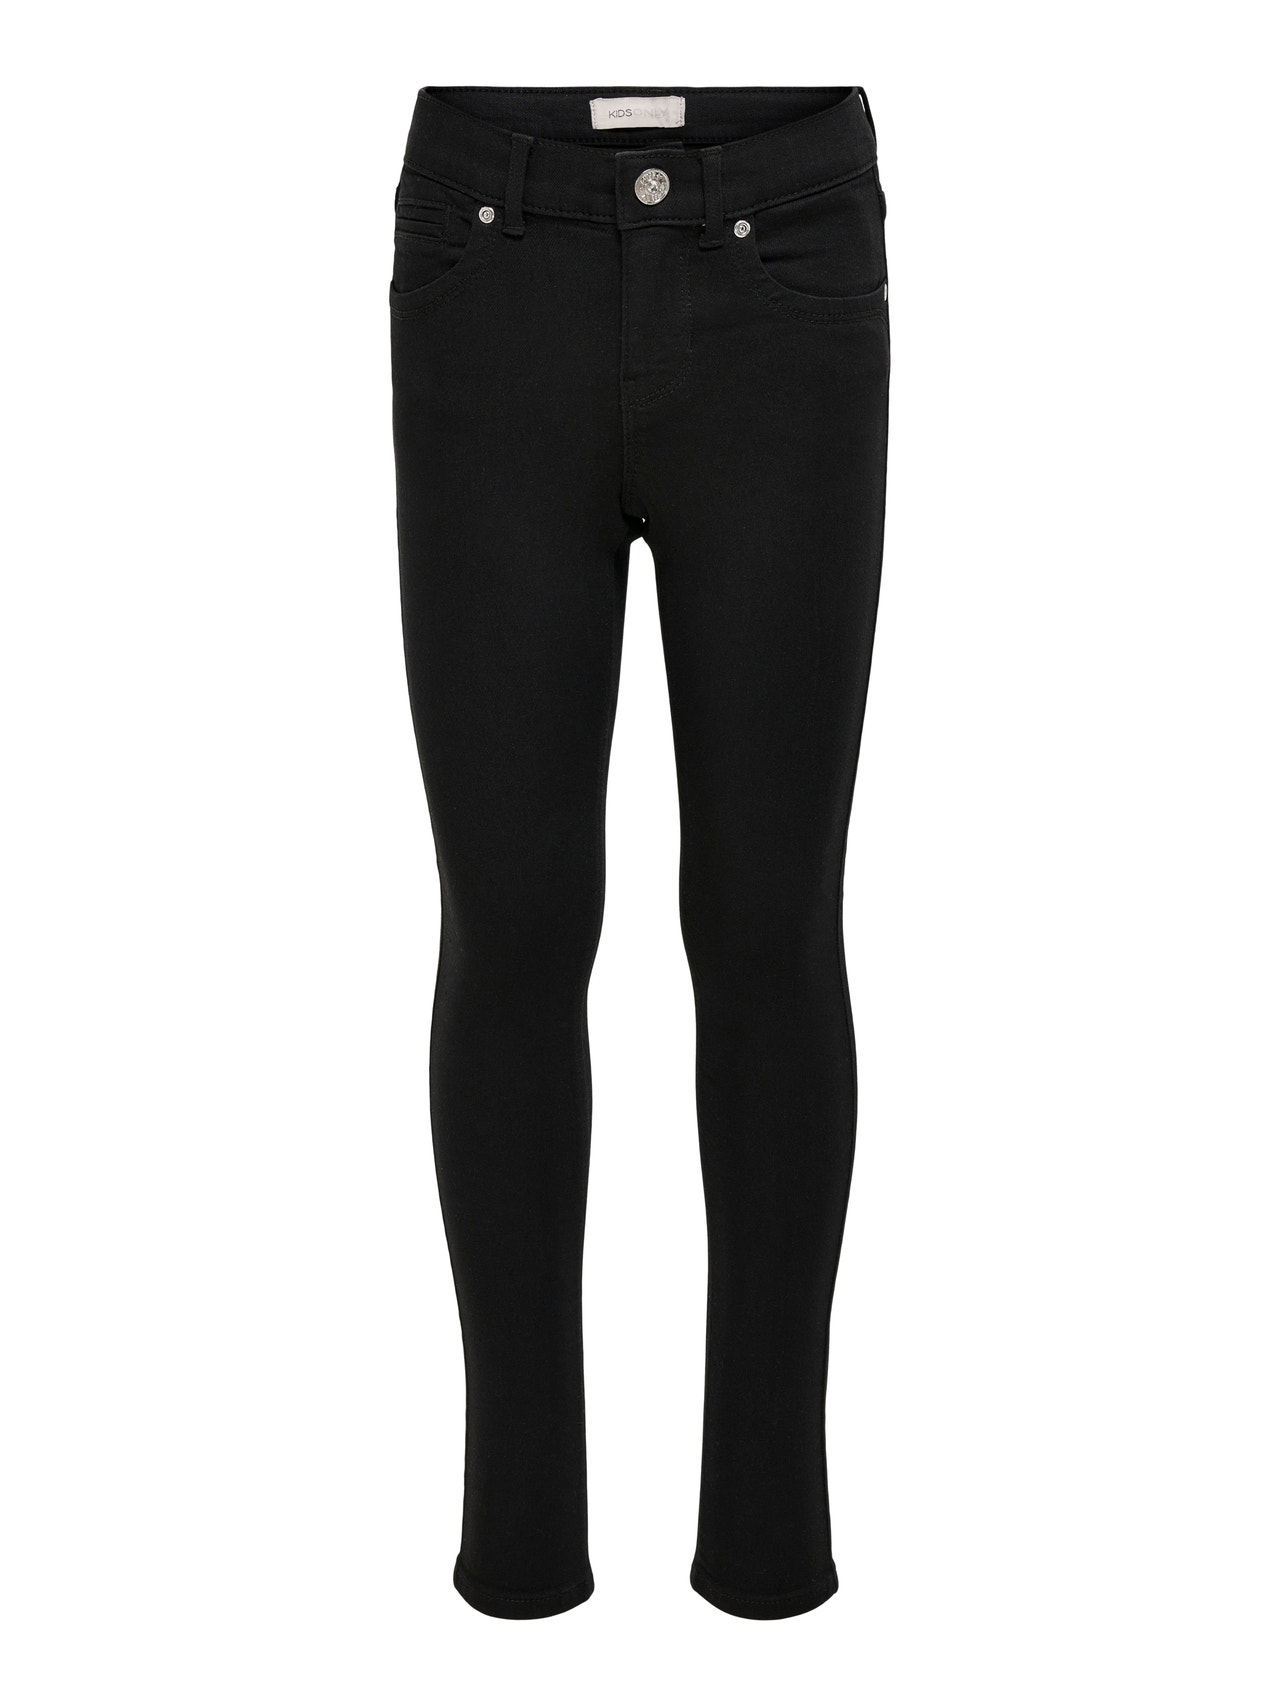 ONLY Skinny Fit Jeans -Black - 15234681